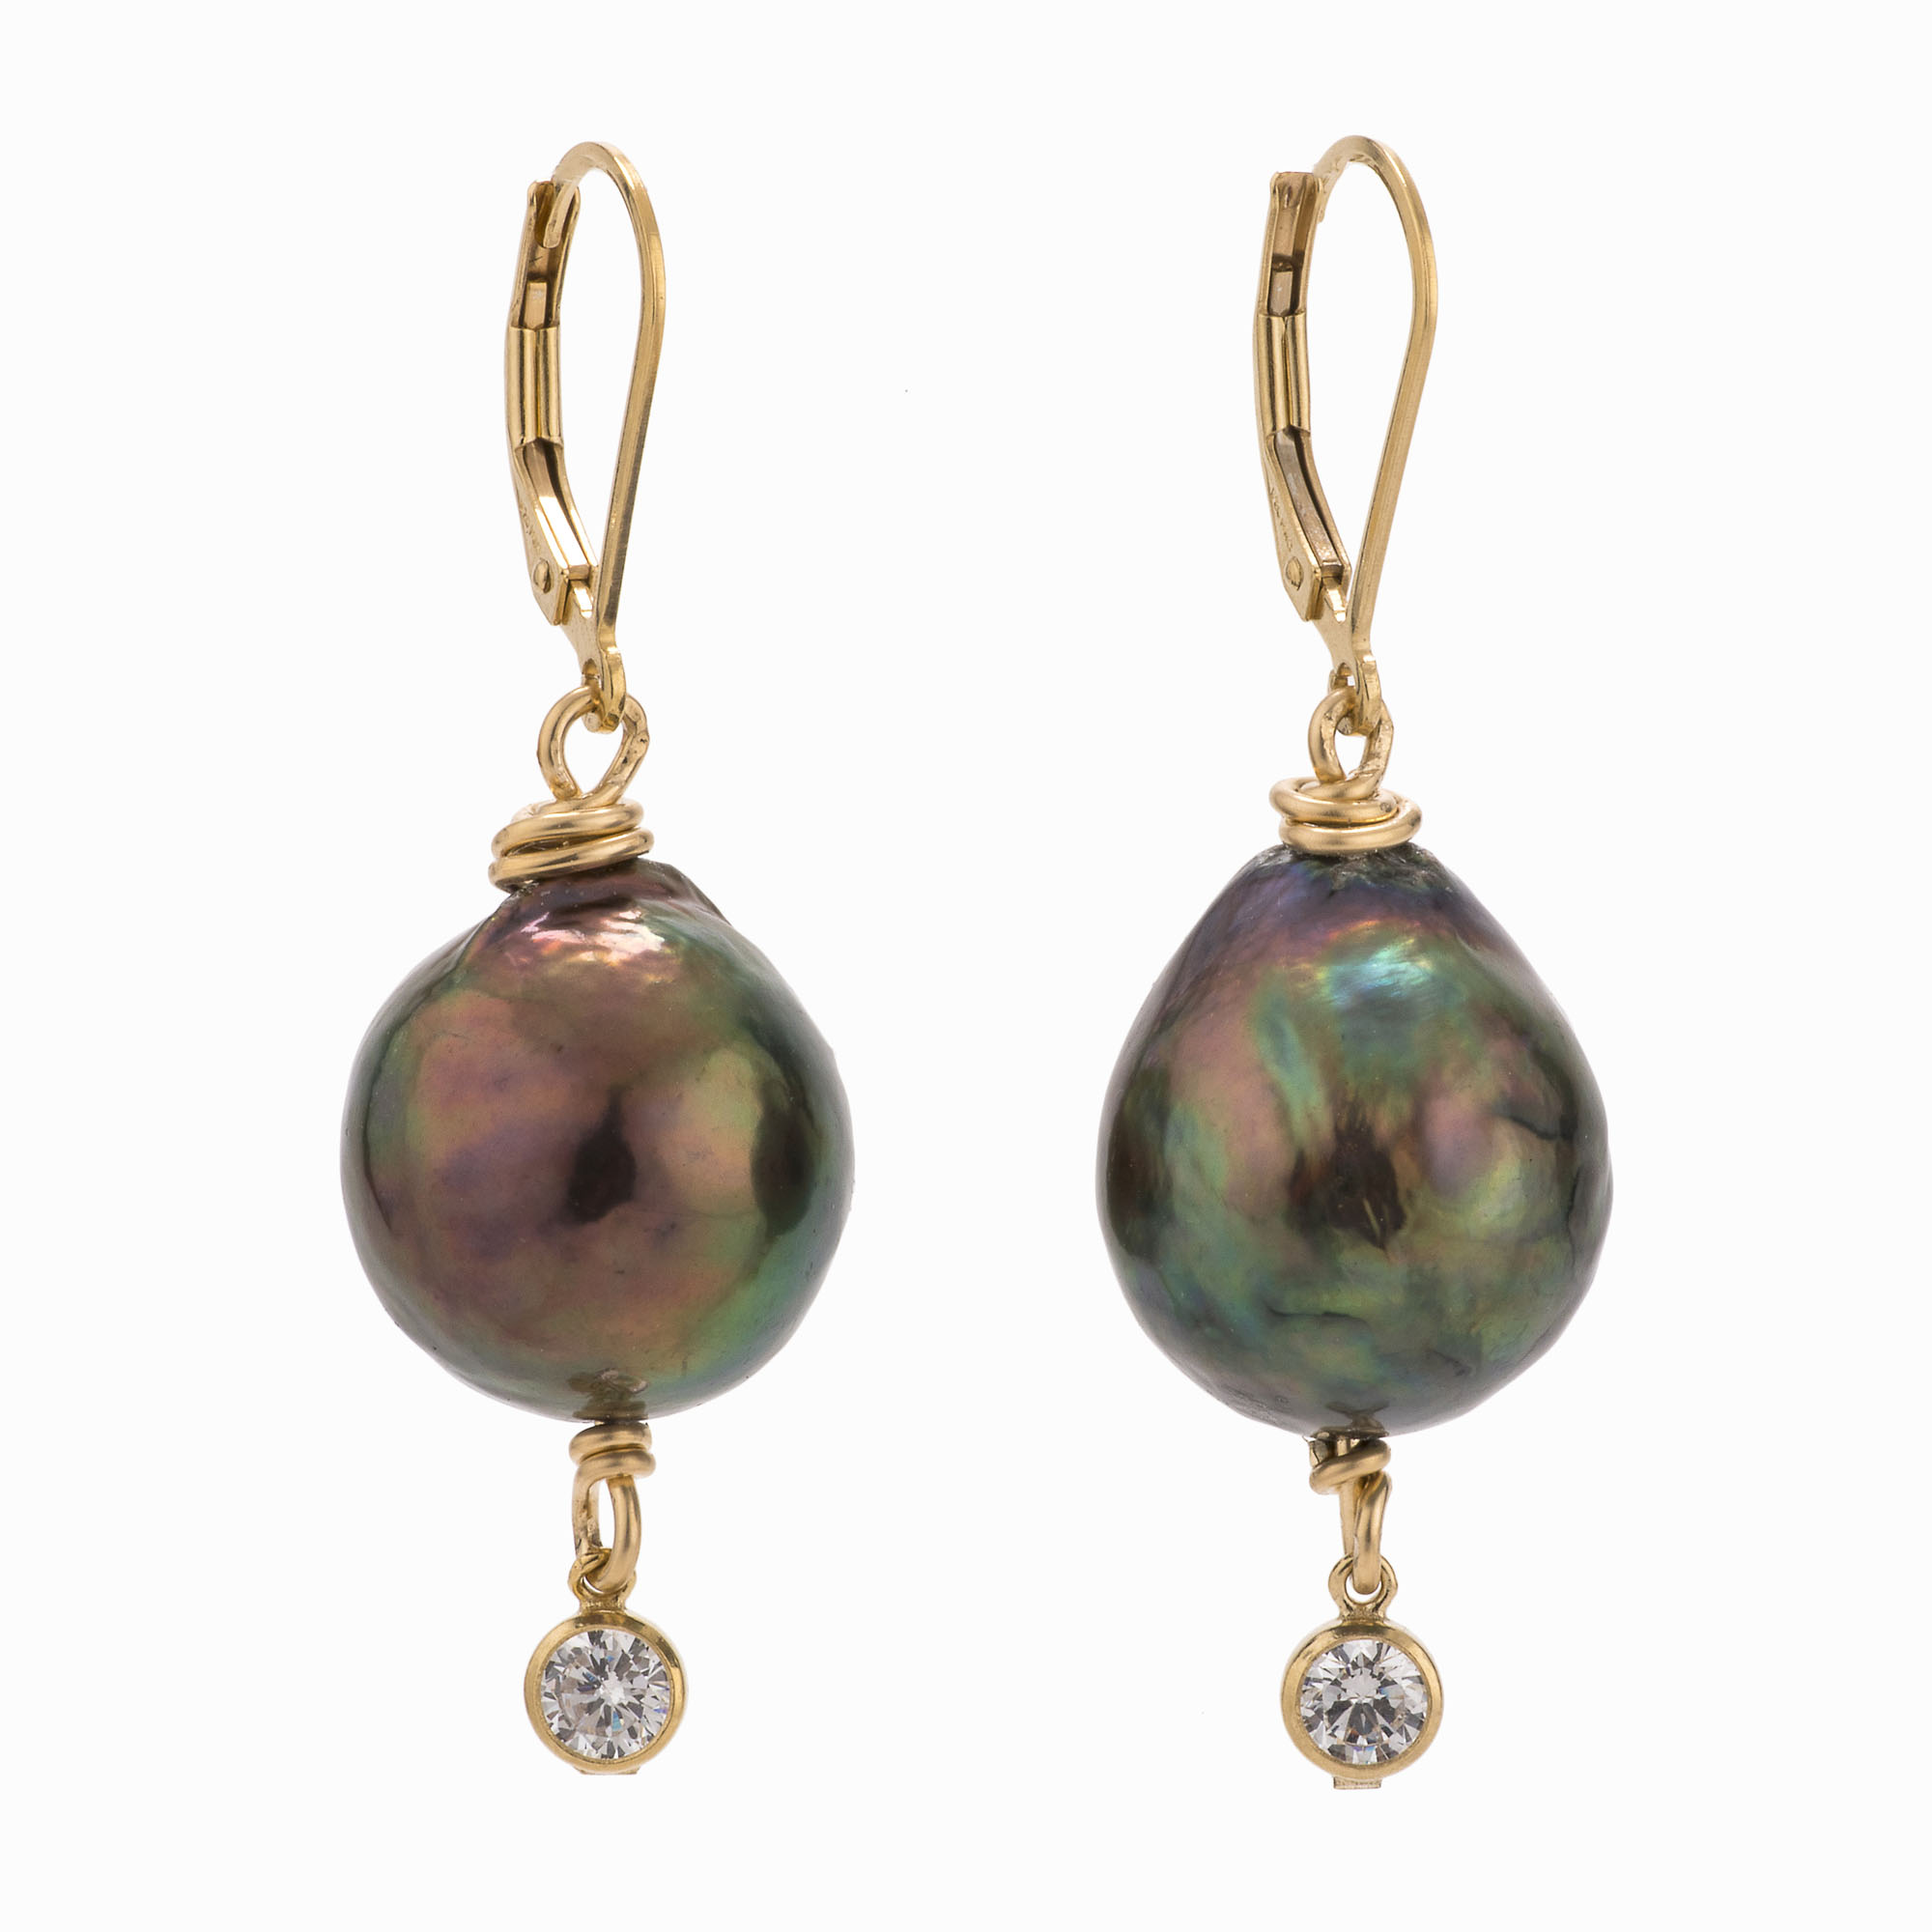 A pair of black fresh water pearl earrings with 14k gold-filled backs and crystal drops.